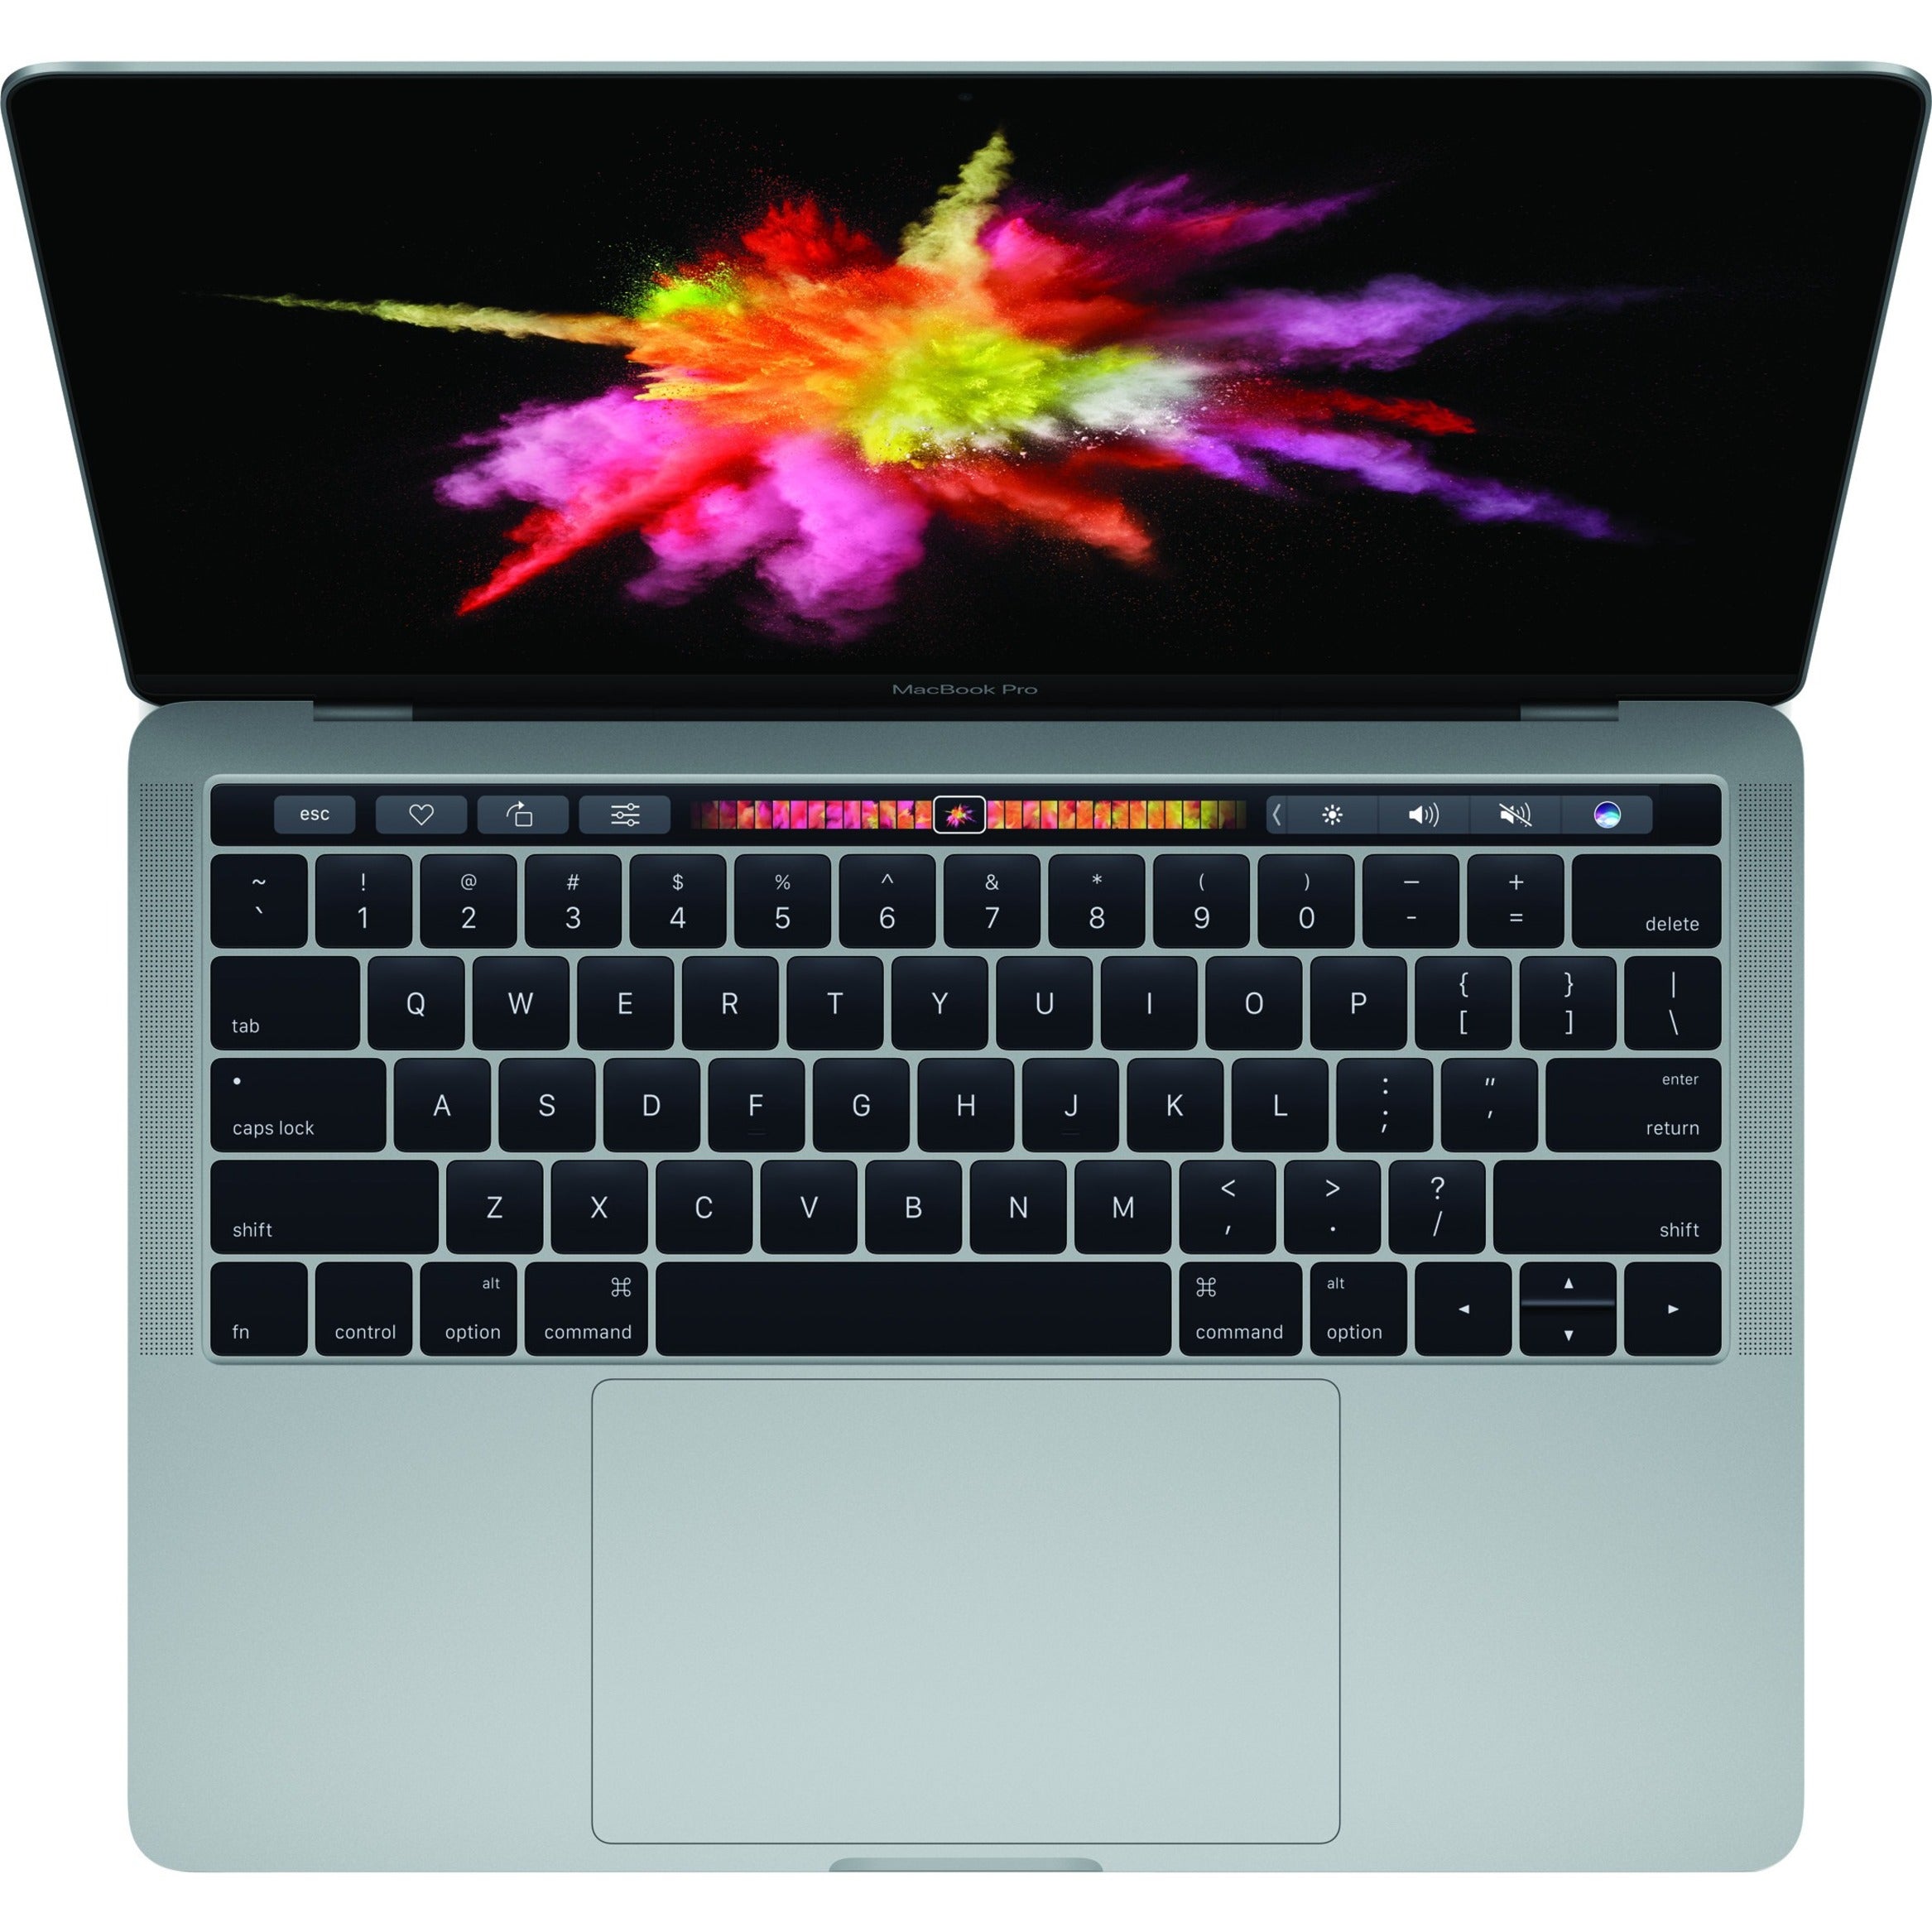 Apple MLH32LL/A MacBook Pro 15-inch Space Grey, 256GB SSD, 16GB RAM, Core i7, 10 Hour Battery